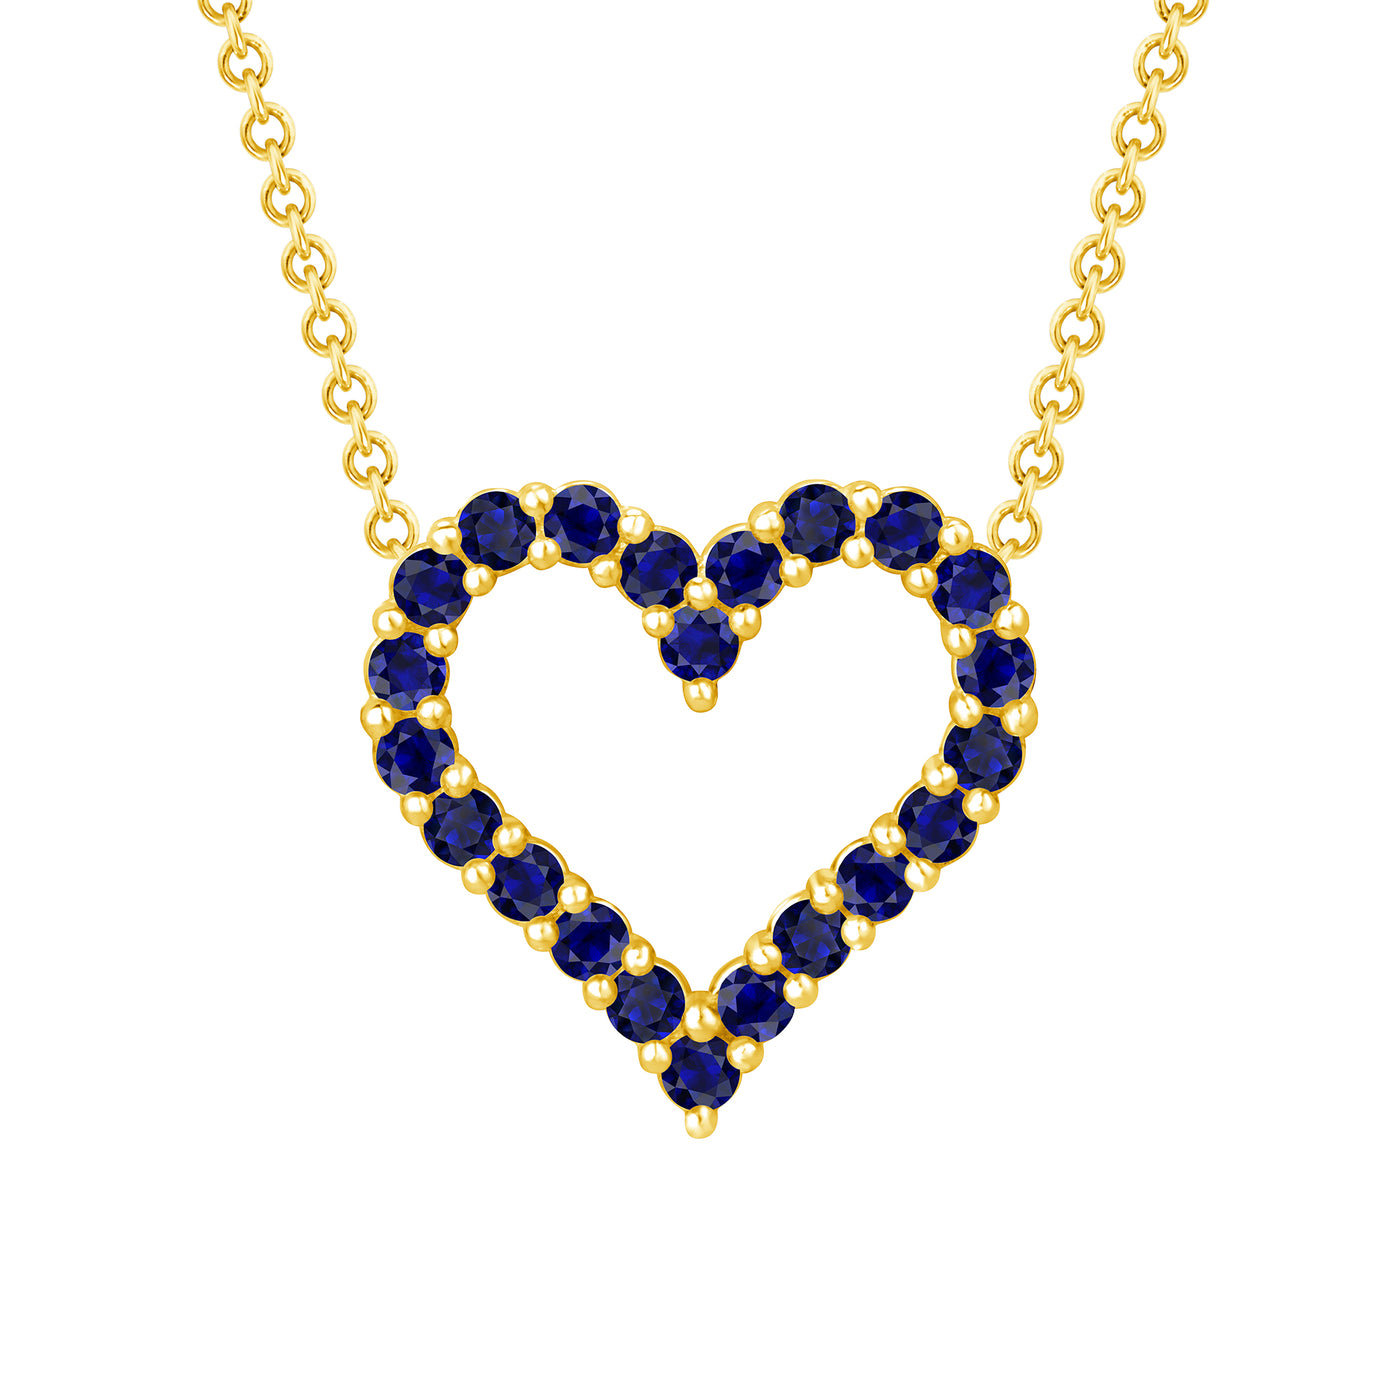 Sapphire Heart Pendant 0.23 Carat Round Cut in Yellow, Rose or White Gold 16" Chain